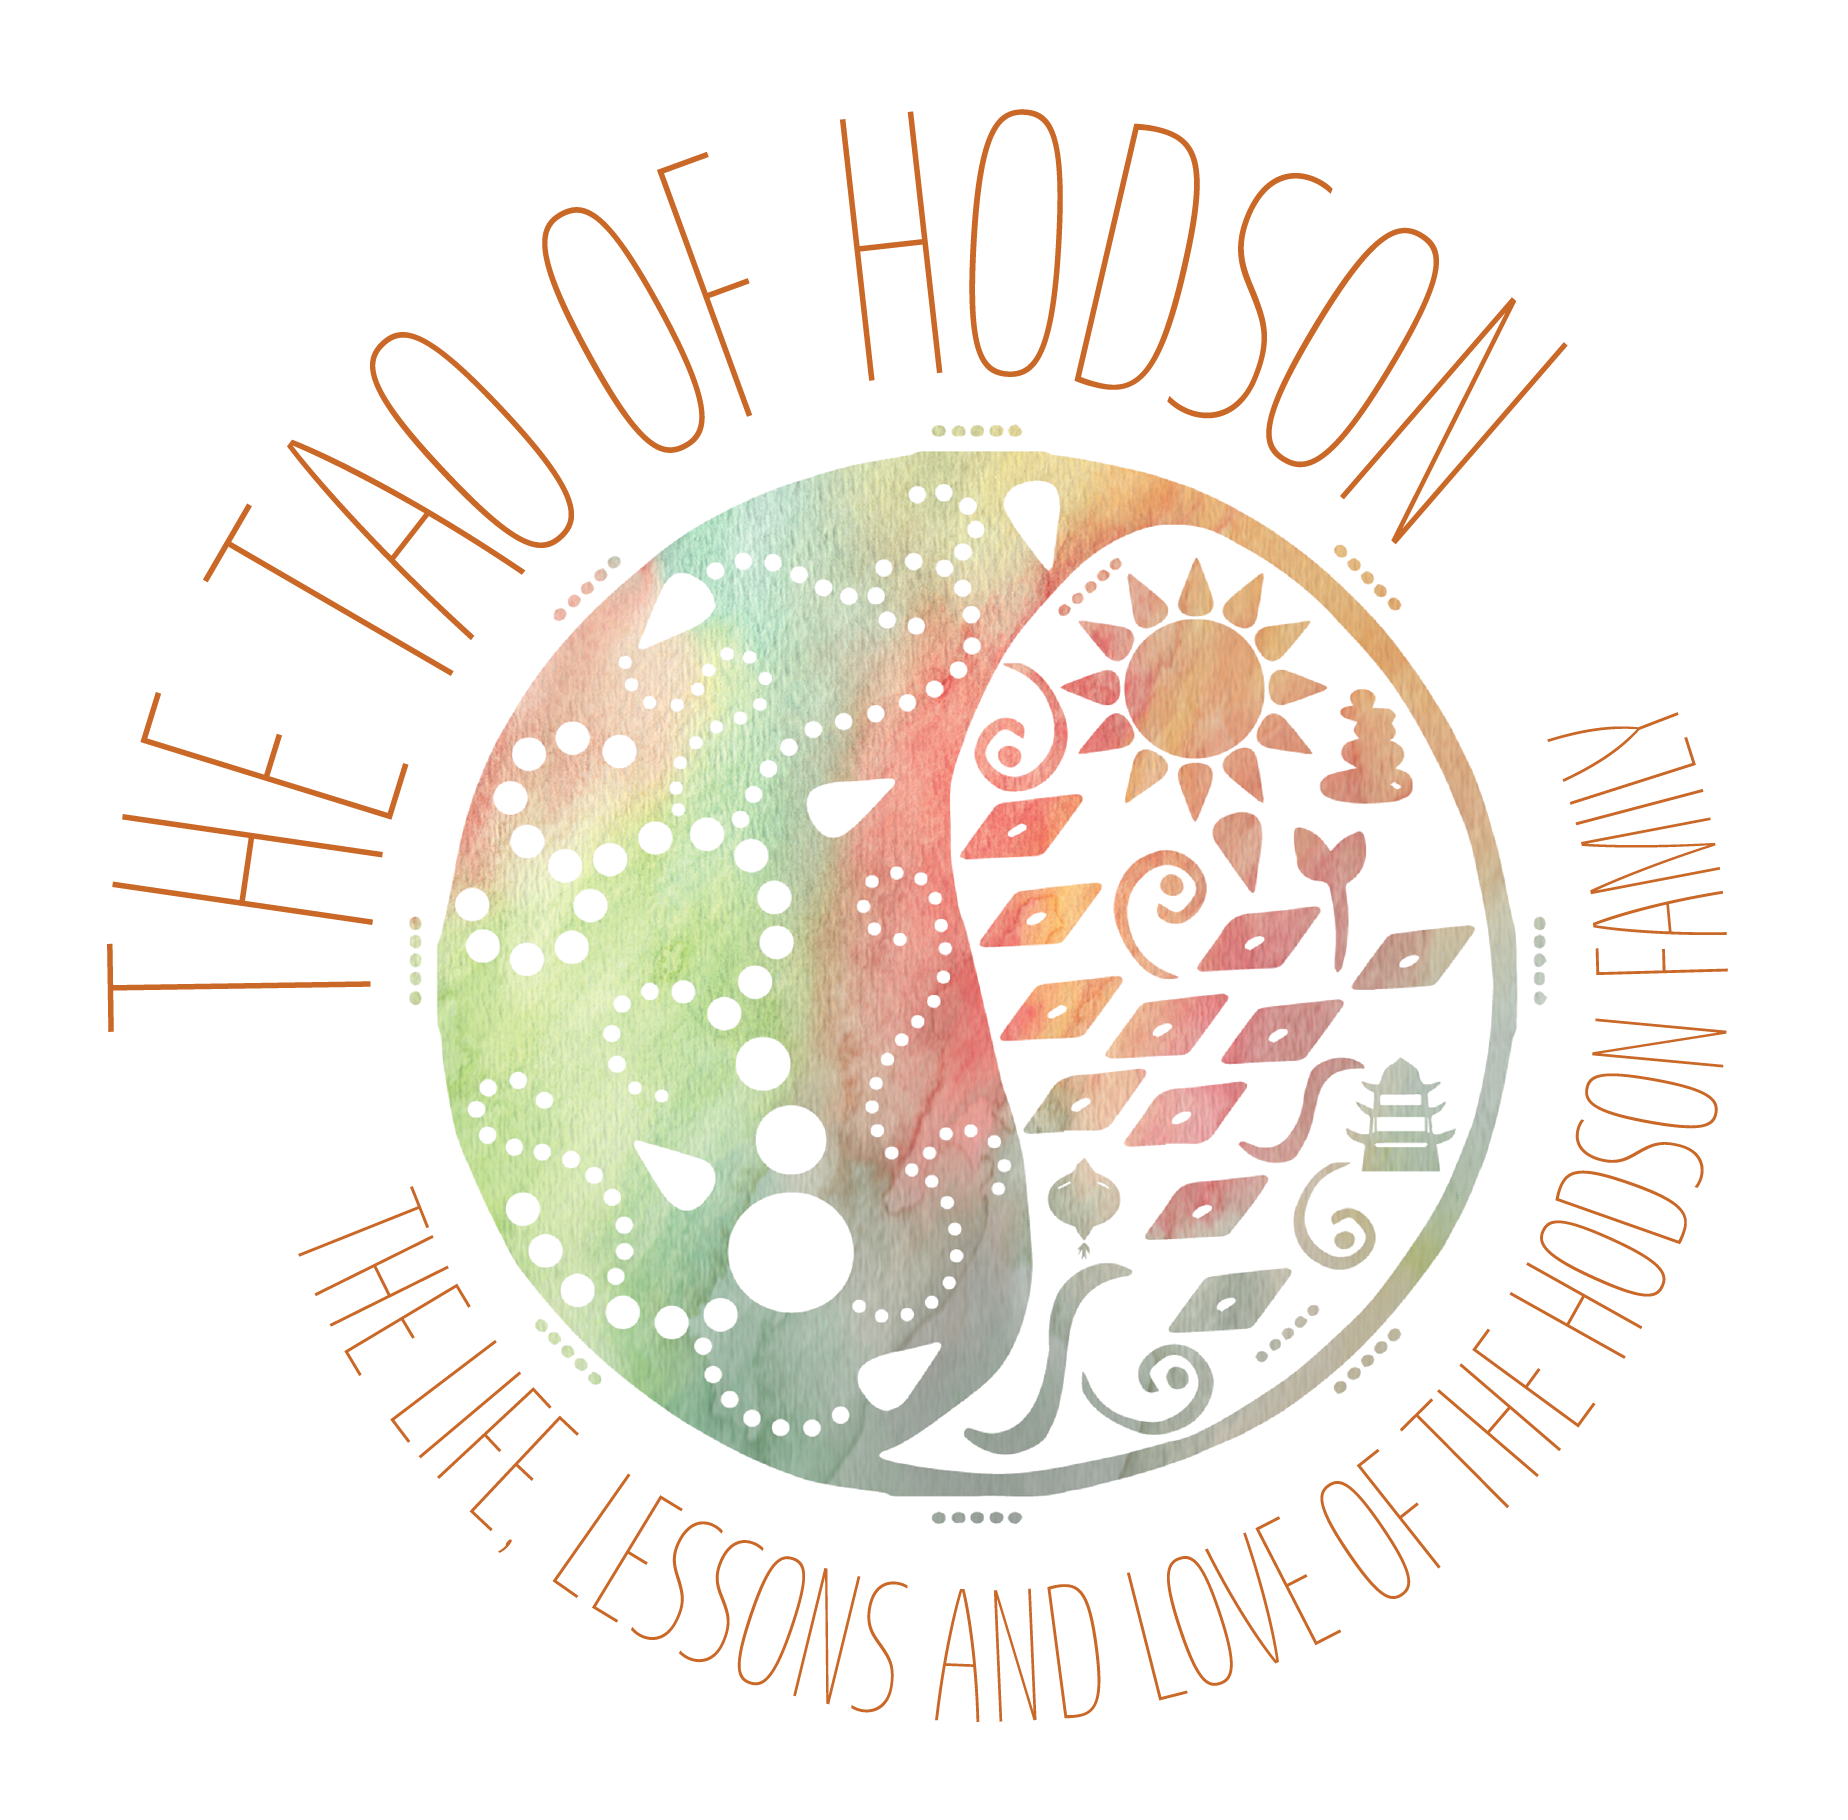 The Tao of Hodson